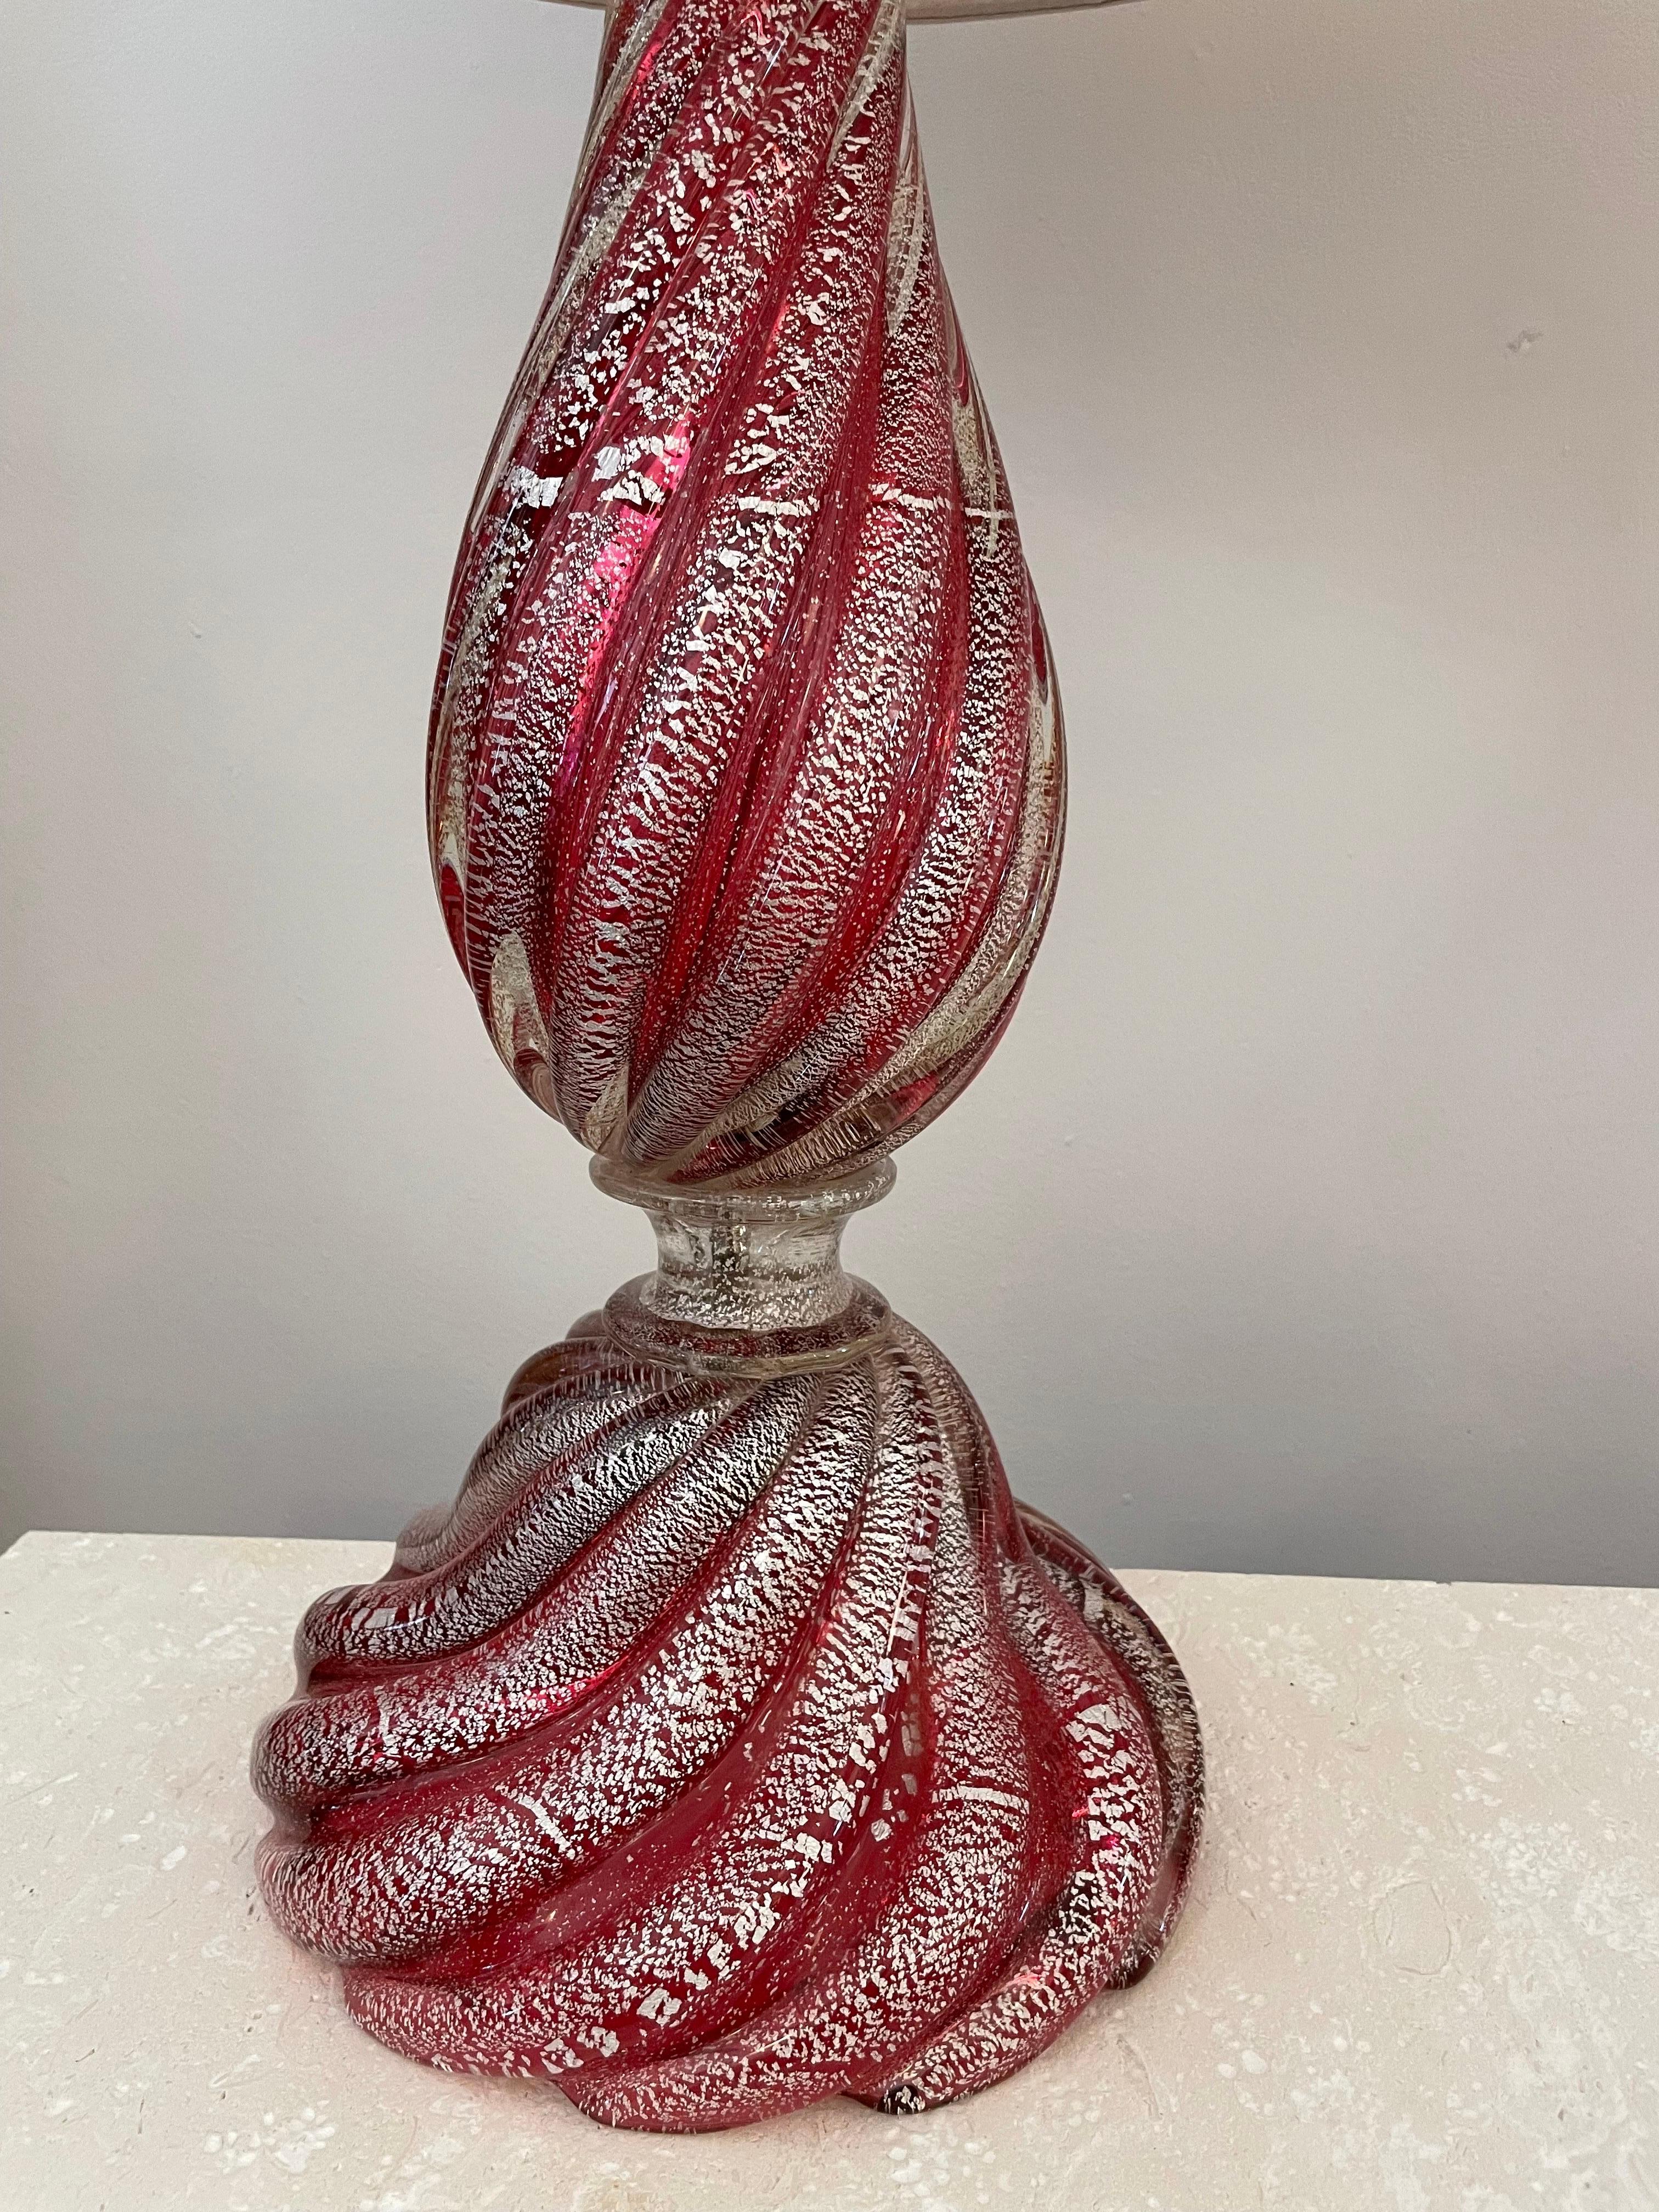 Oversized Raspberry Murano Glass Lamps W/ Silver Foil Inclusions by Barovier In Good Condition For Sale In East Hampton, NY